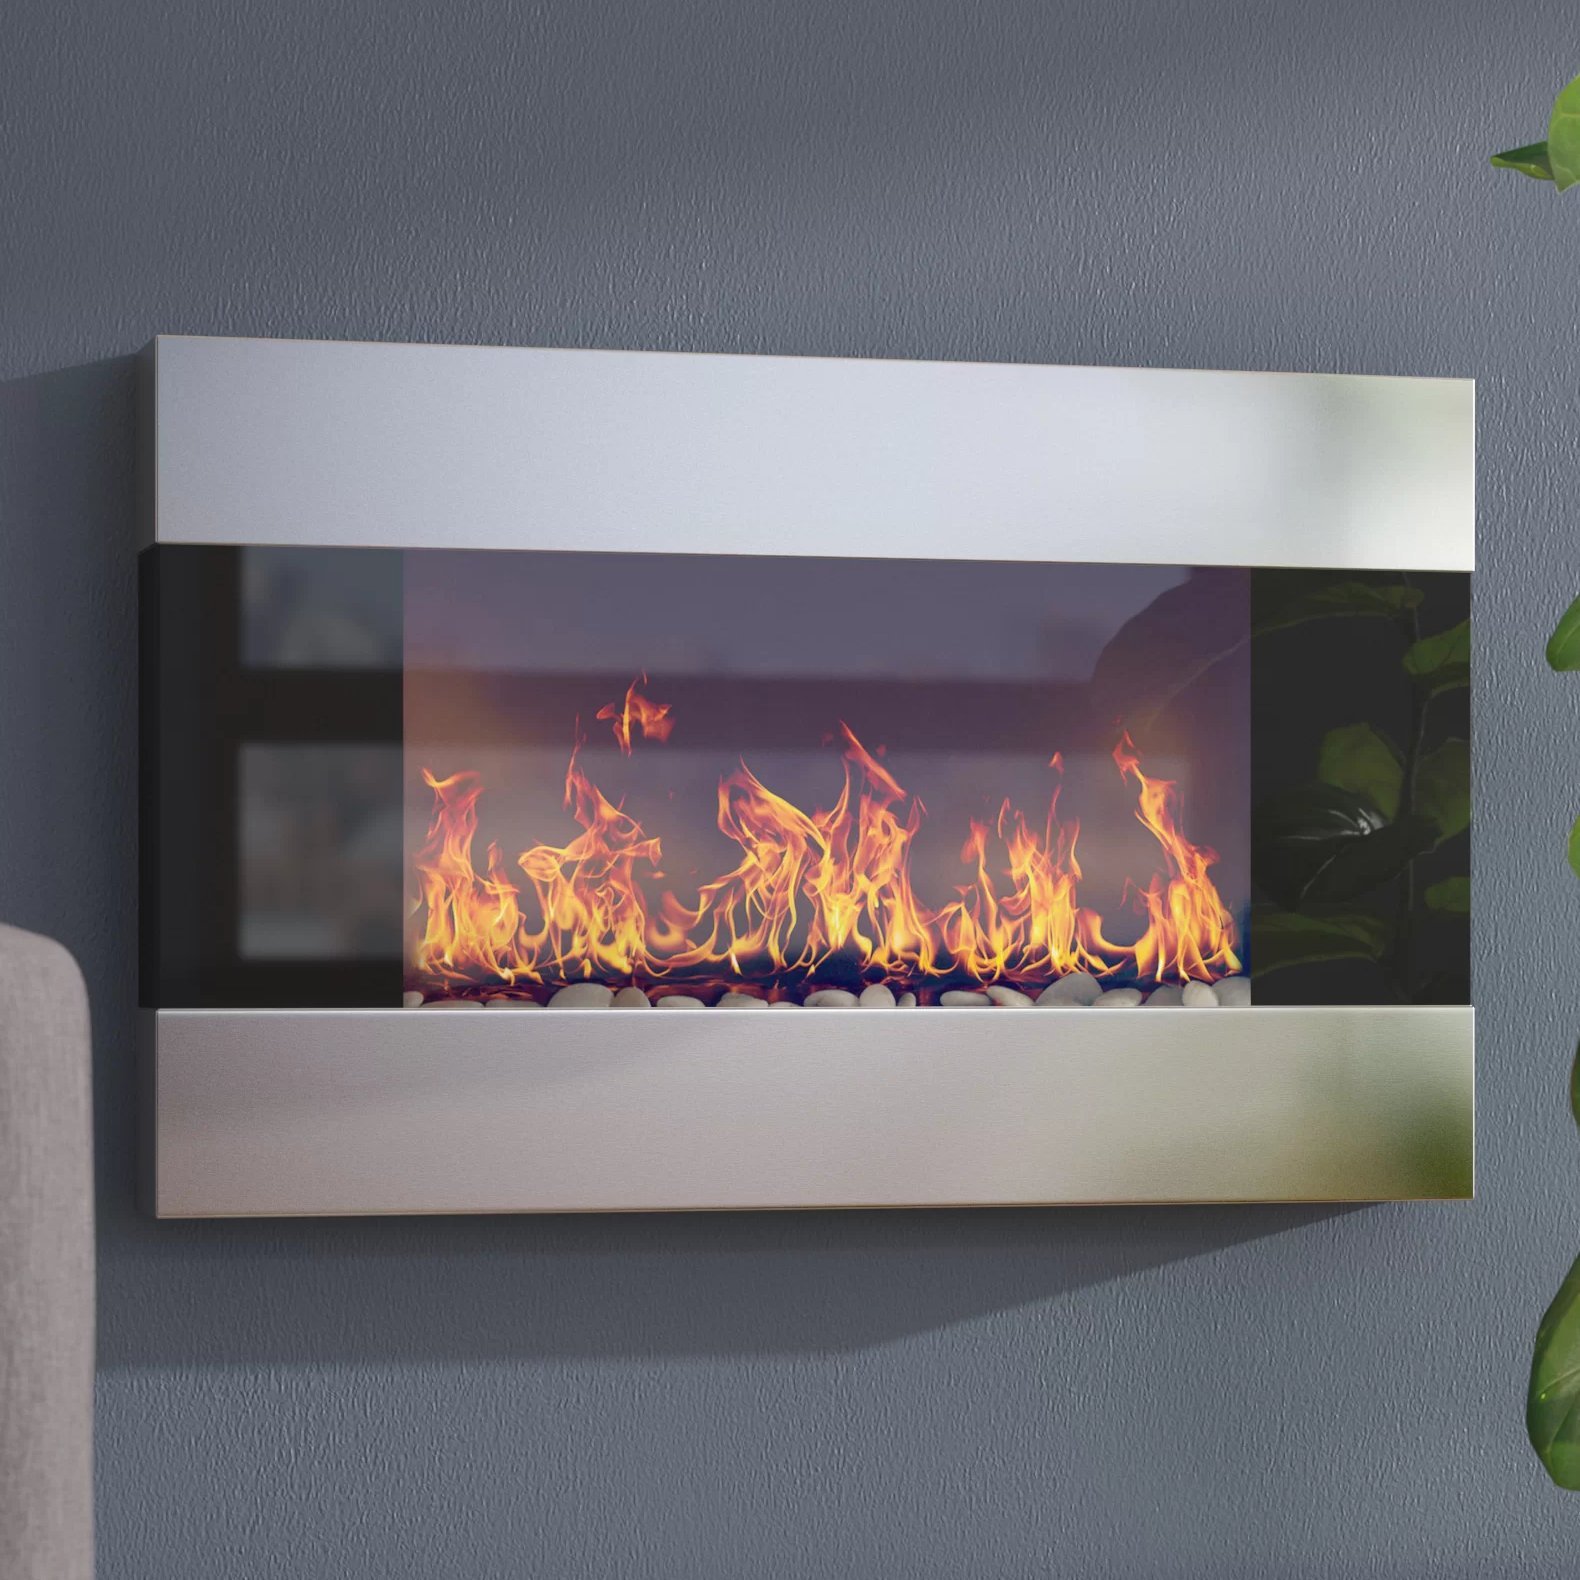 Get an electric Fireplace today! Enjoy throughout the year!